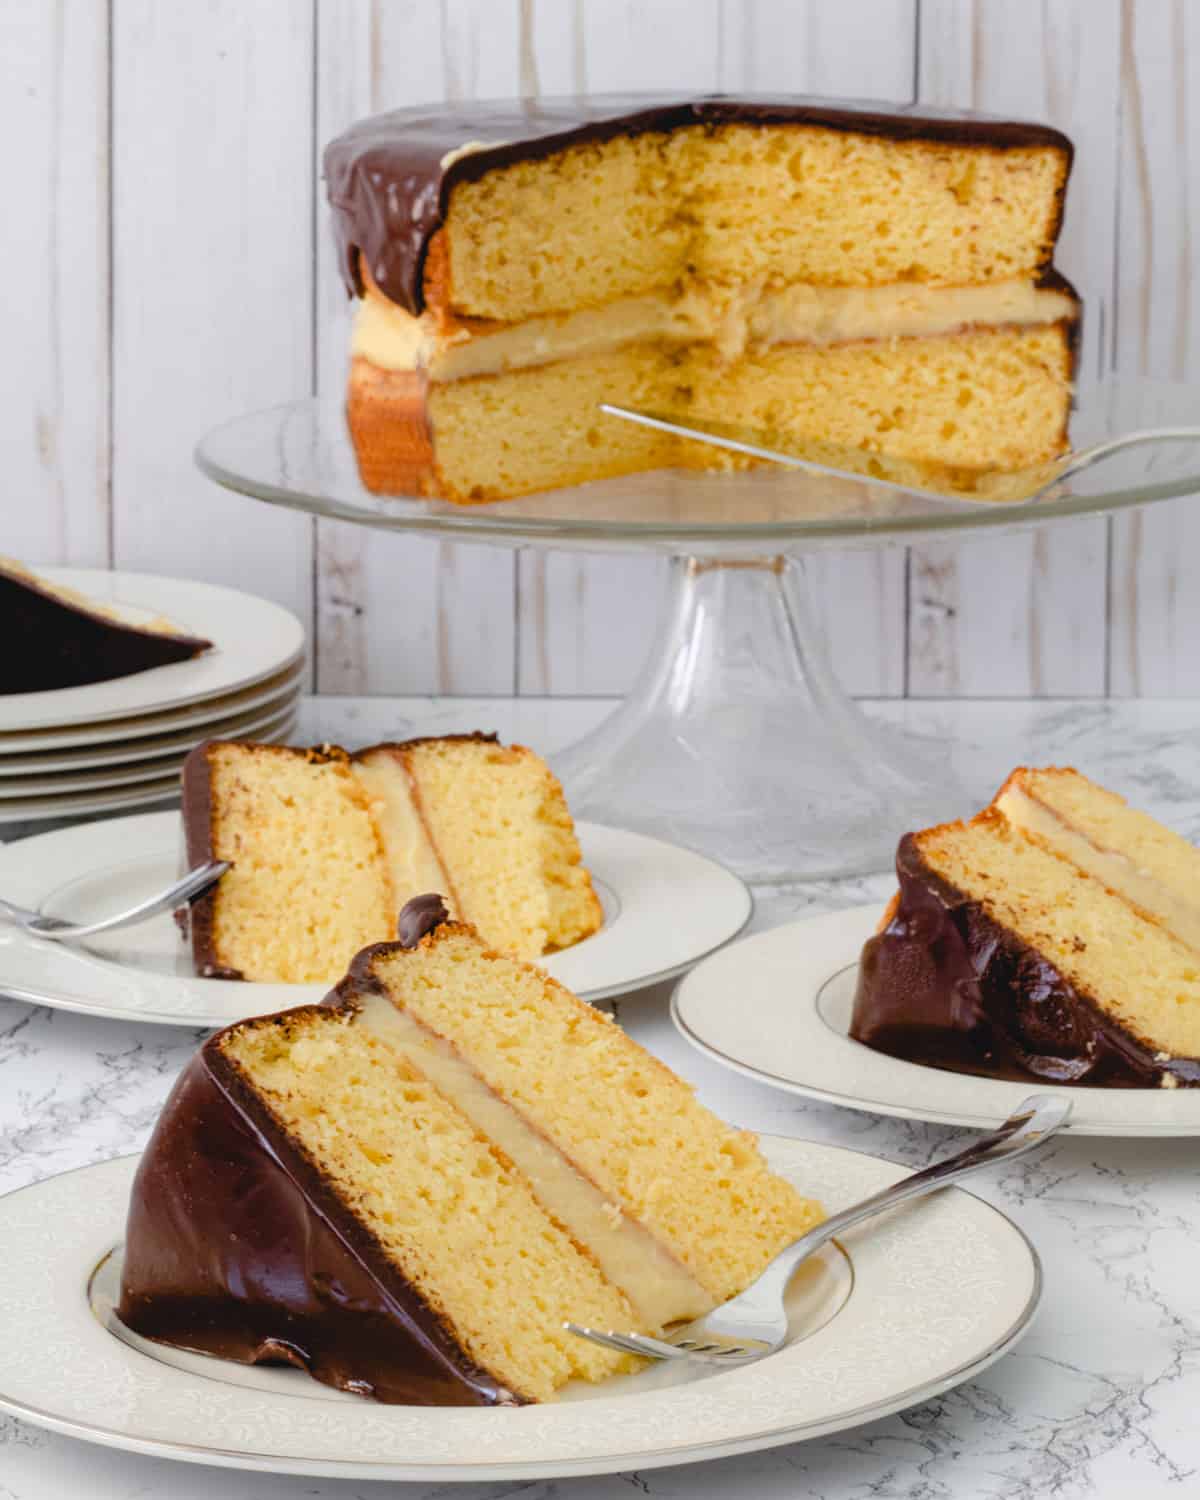 Slices of cakes on plates, with remaining cake on a cake plate.